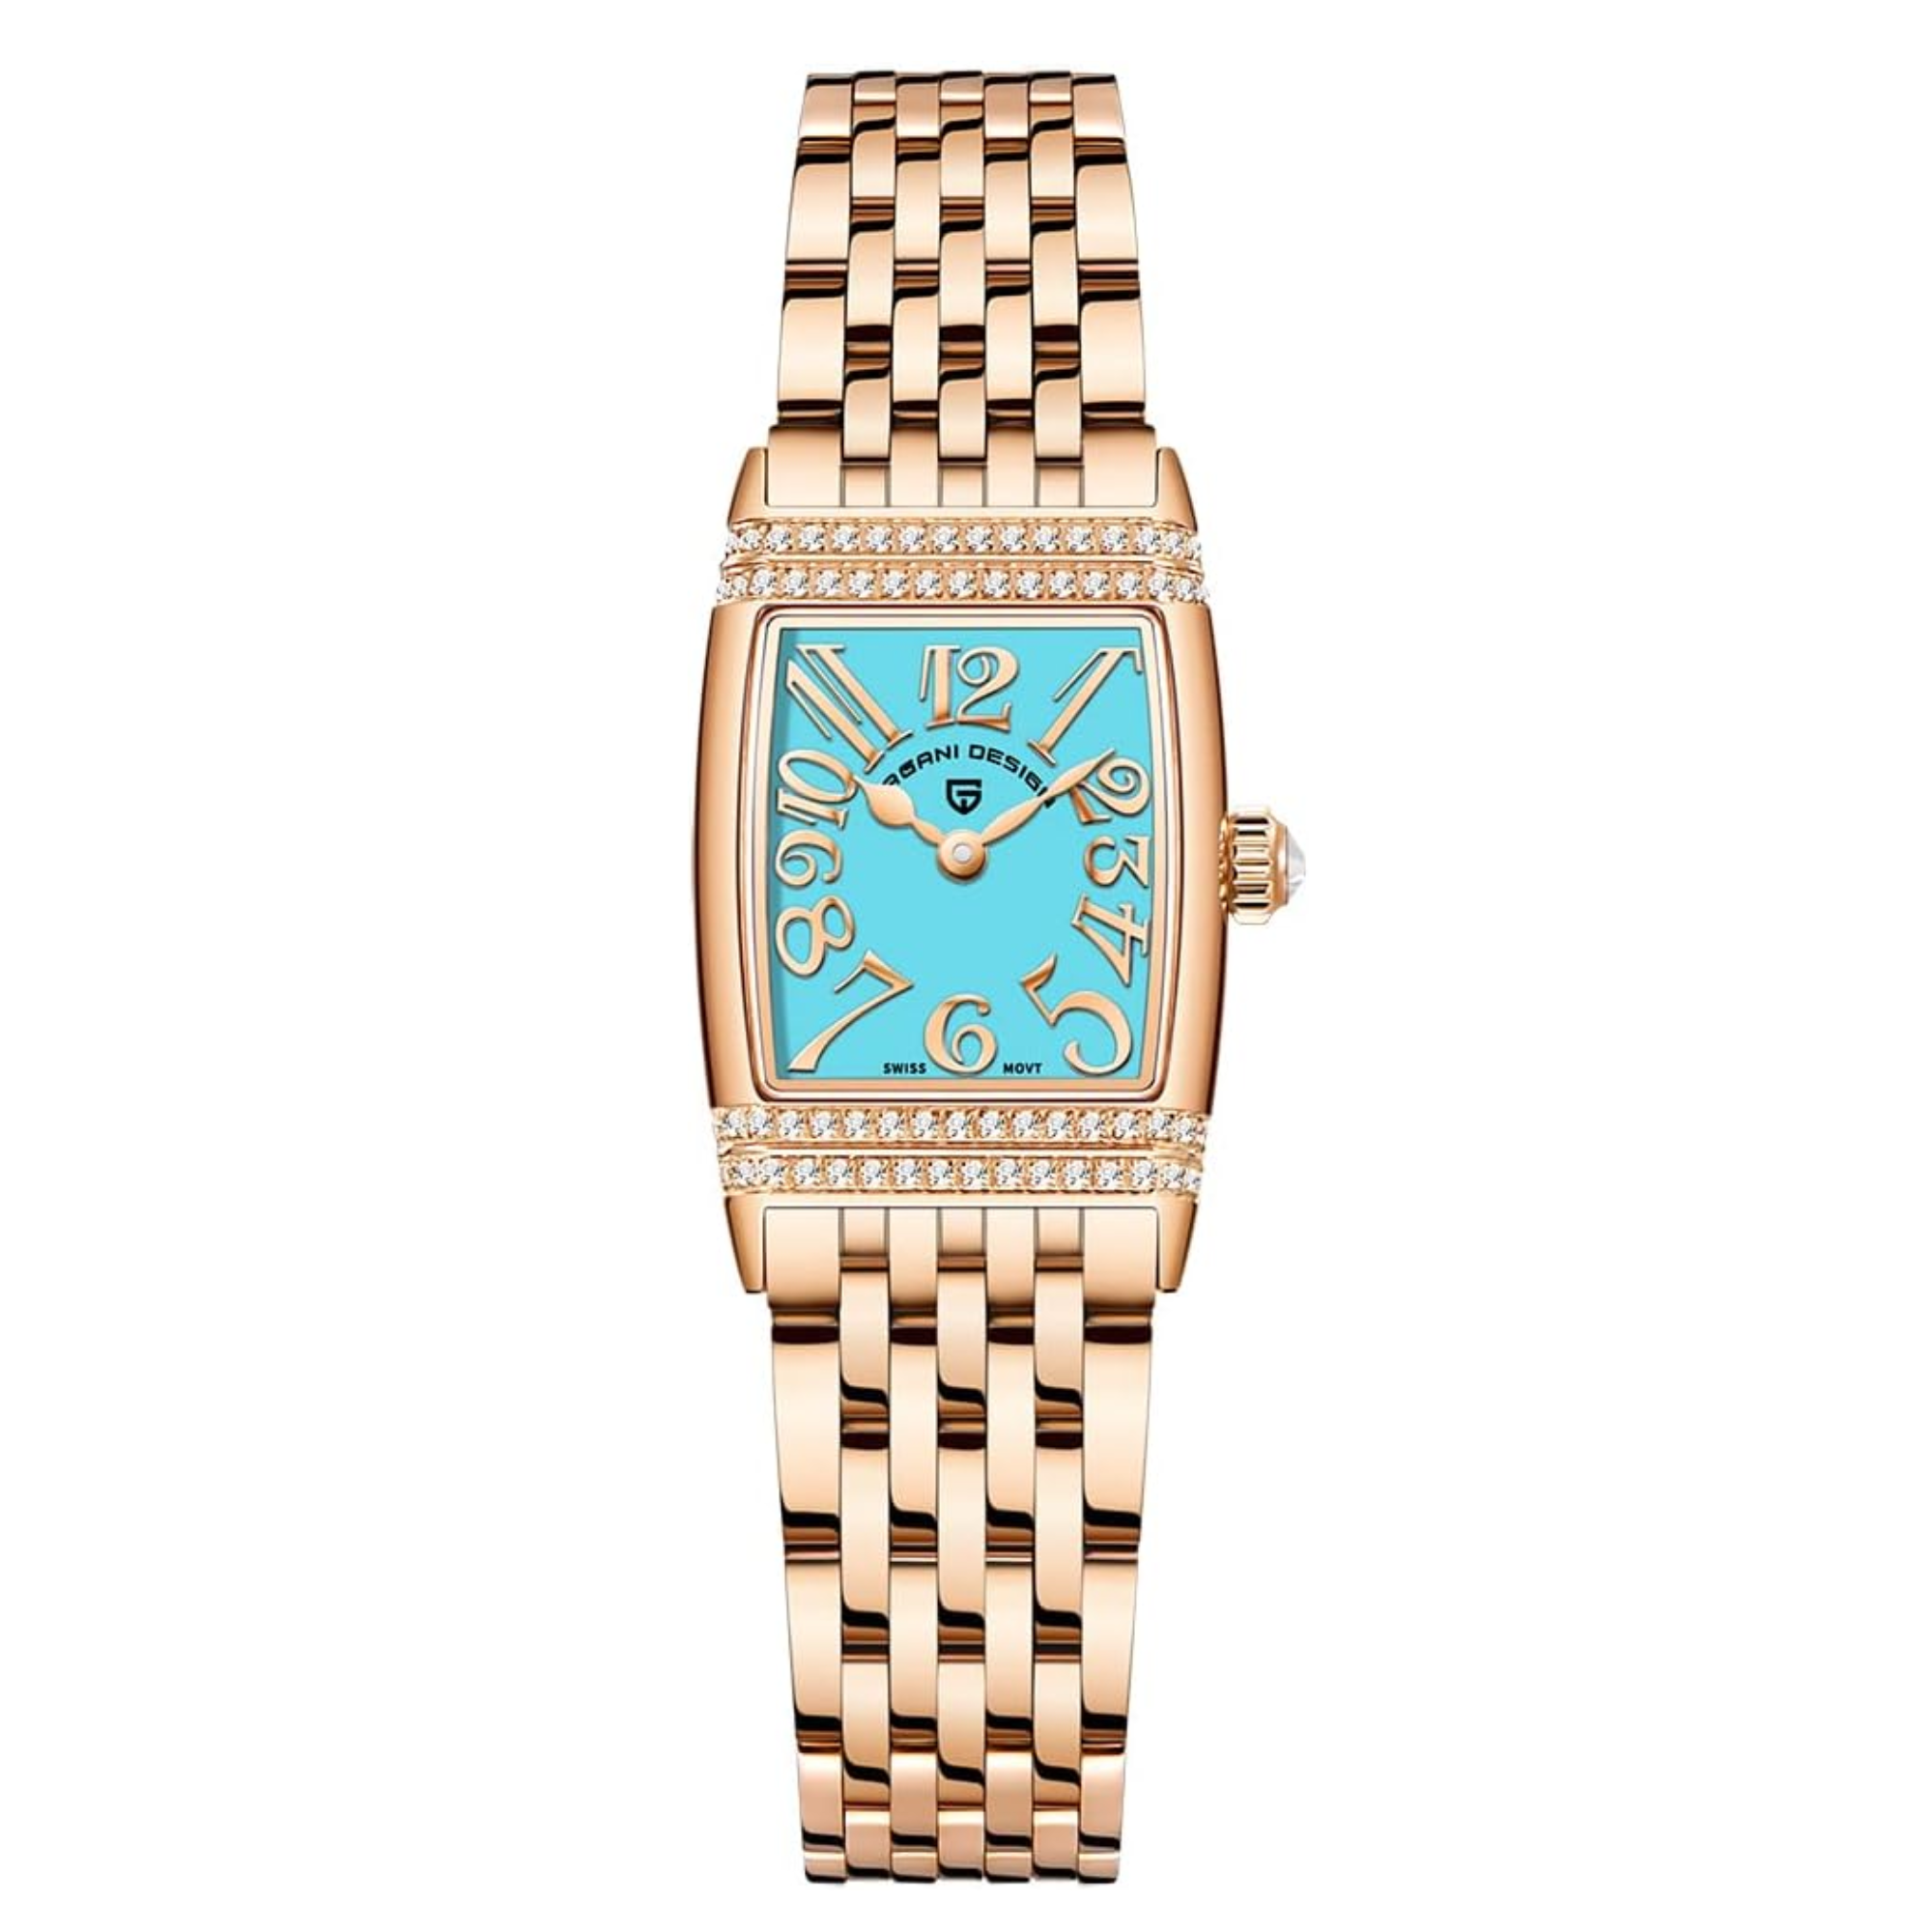 Pagani Design PD-1737 Women's Quartz Watches 22mm with Stone Set Rectangle Case, Analogue Display and Stainless Steel Ladies Watch - Gold Tiffany-Blue